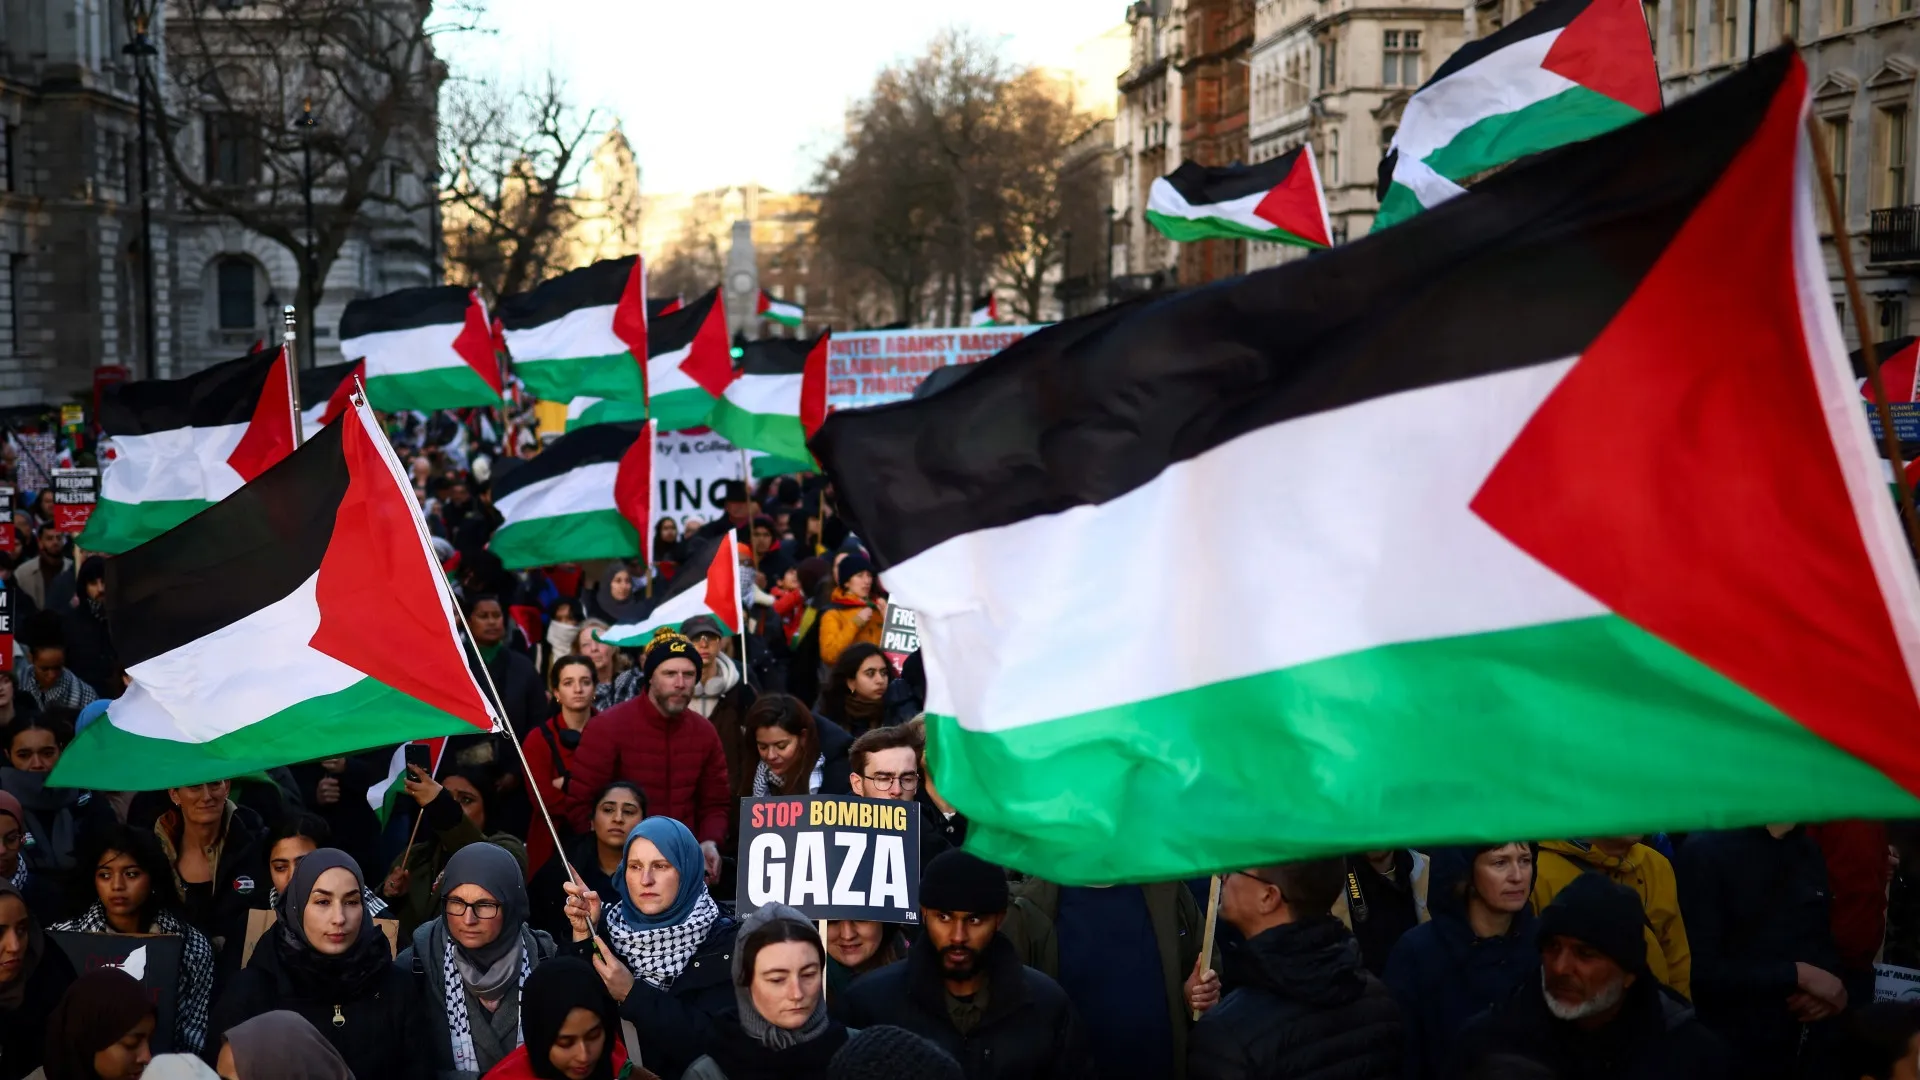 <div>Norway, Spain & Ireland To Recognize Palestinian State</div>